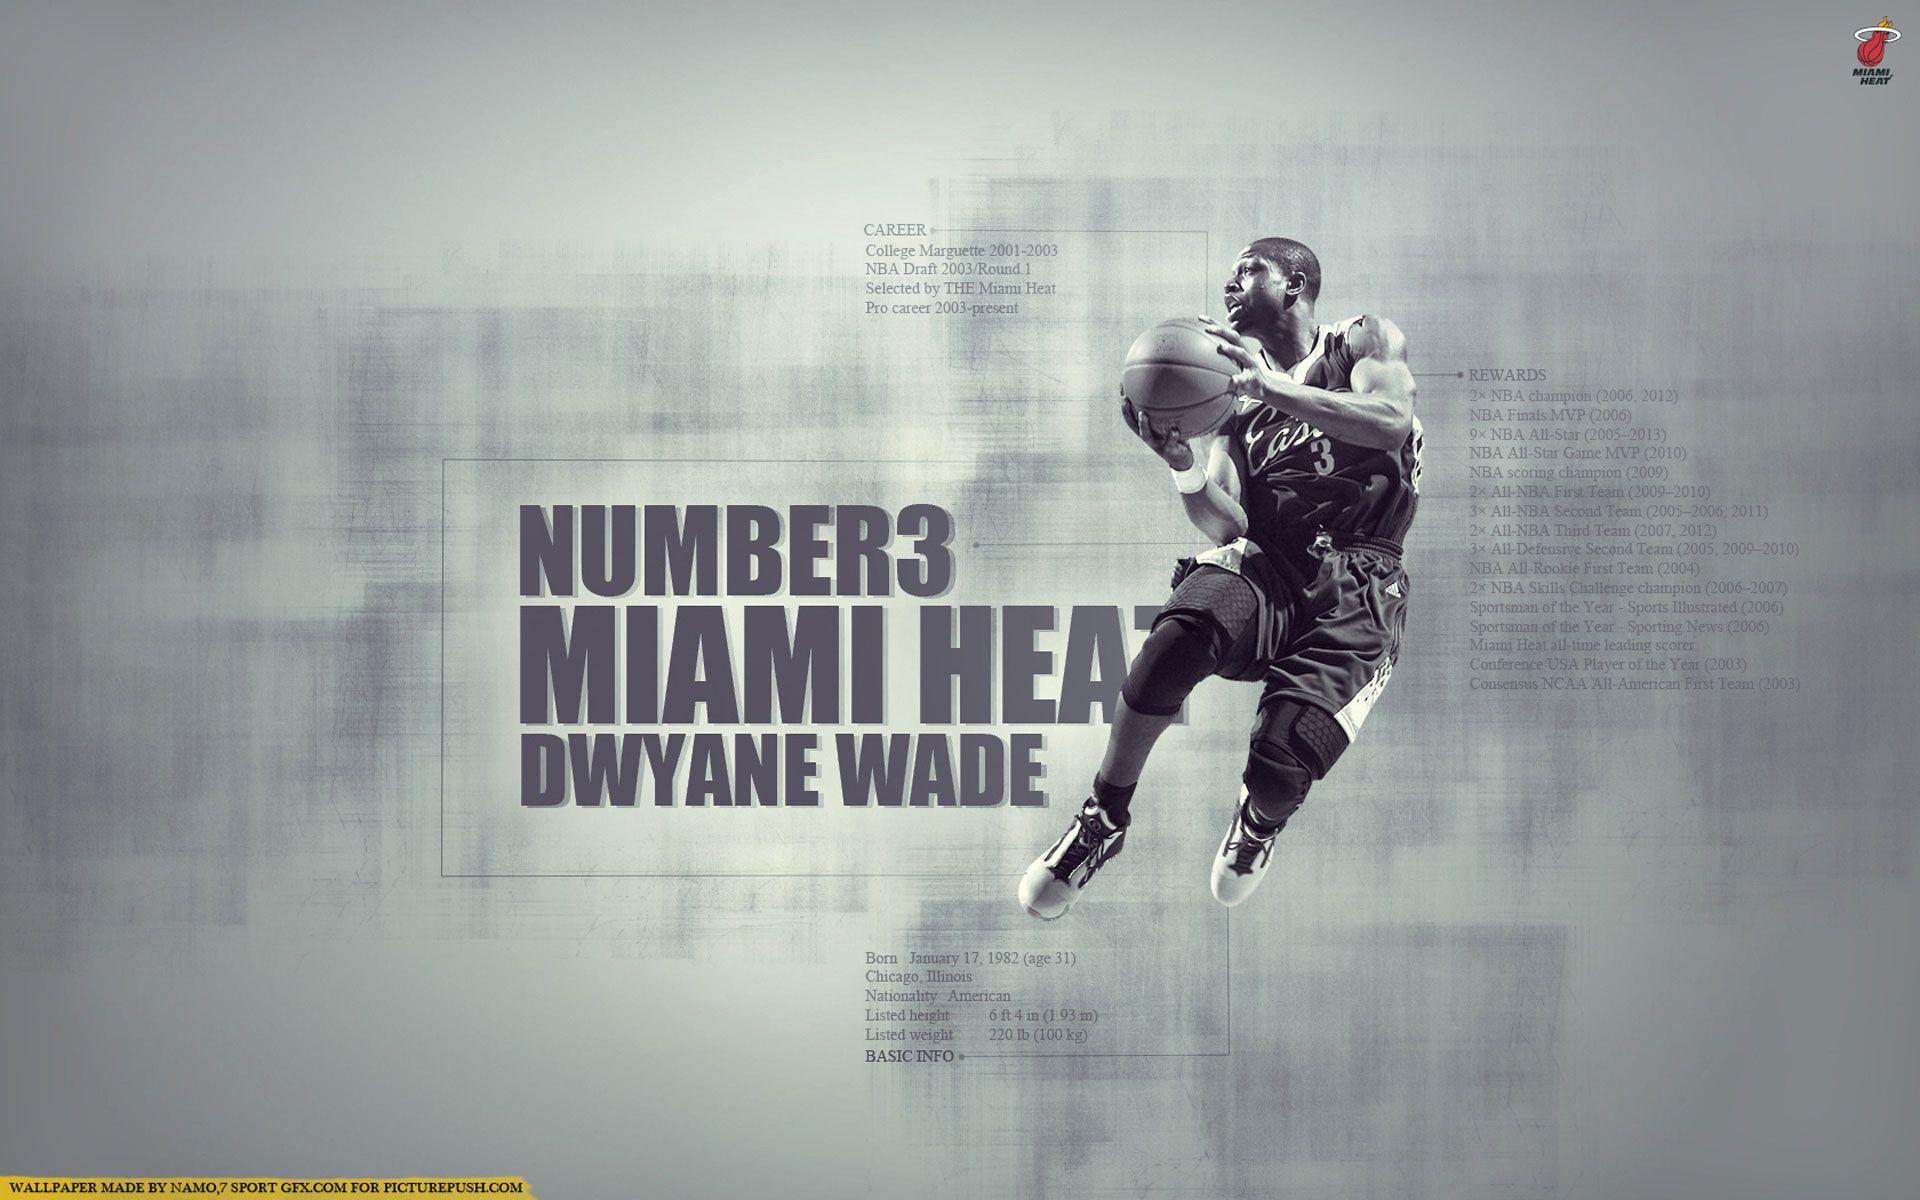 Dwyane Wade Wallpaper HD Collection For Free Download. HD